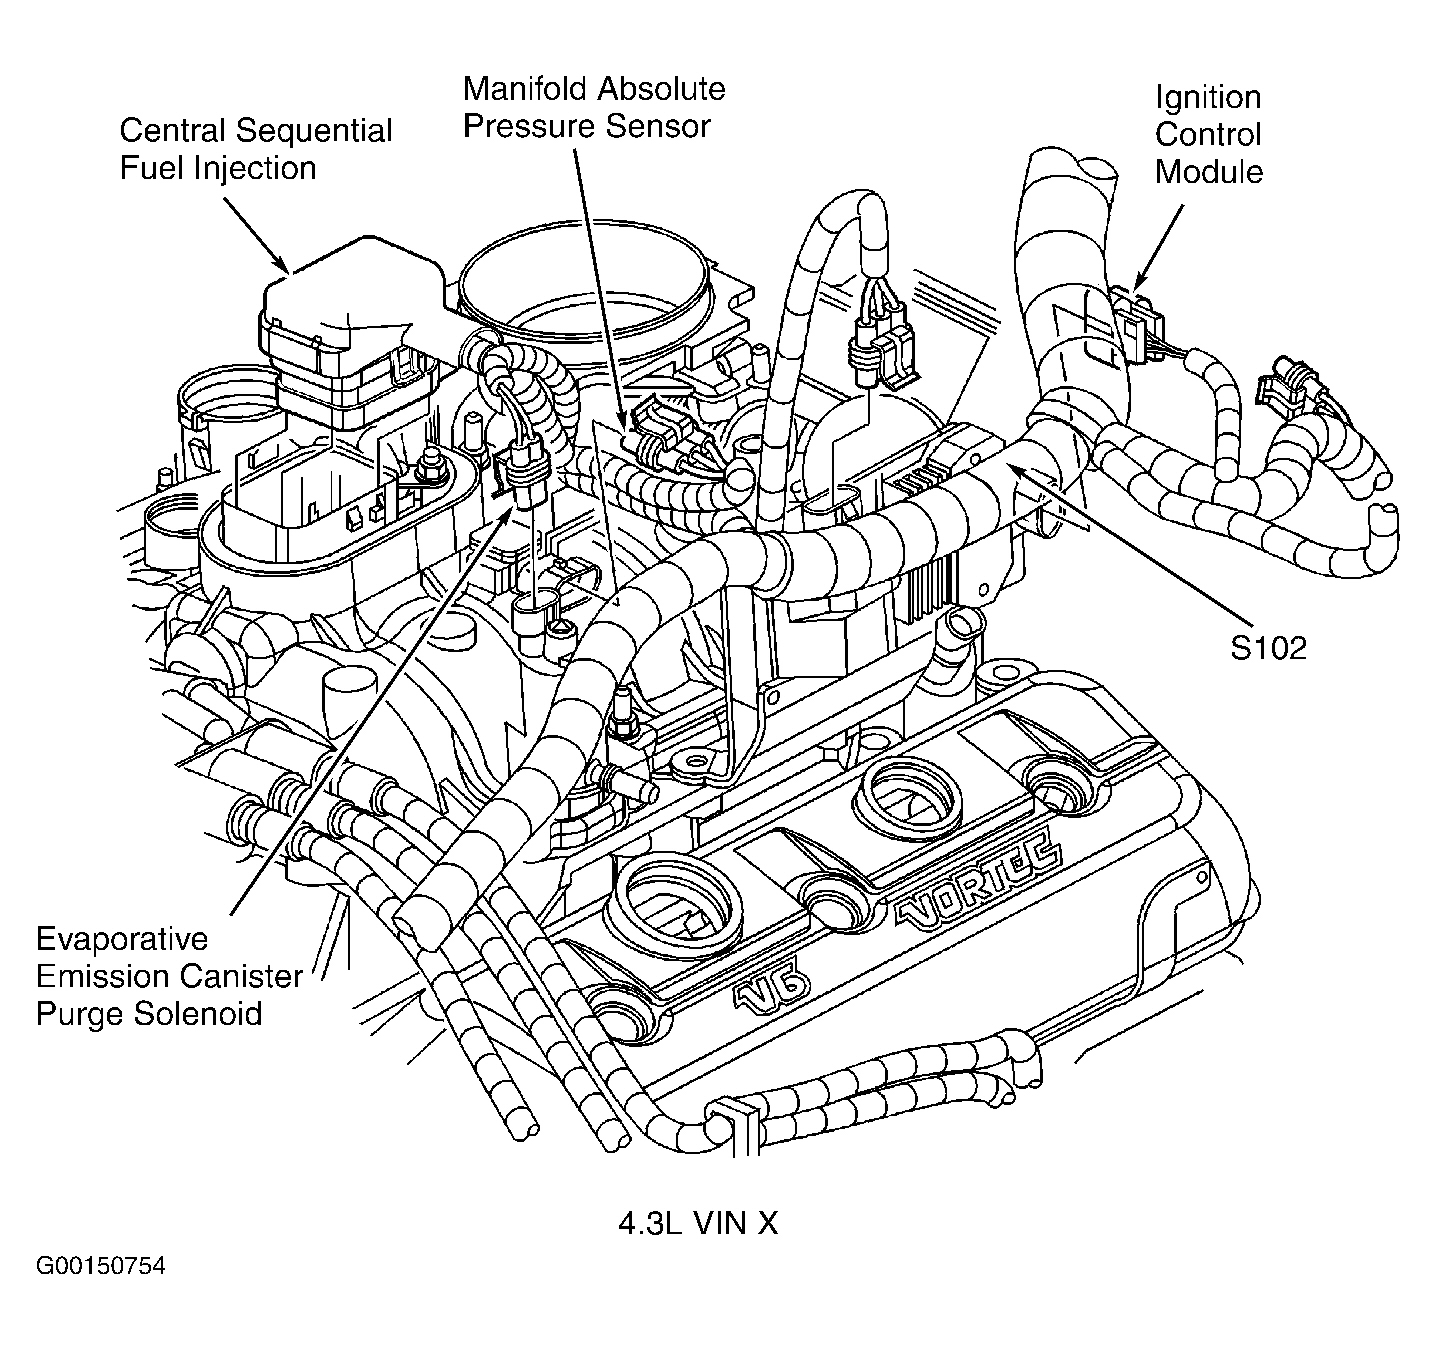 GMC Savana H2500 2003 - Component Locations -  Top Right Side Of Engine (4.3L VIN X)